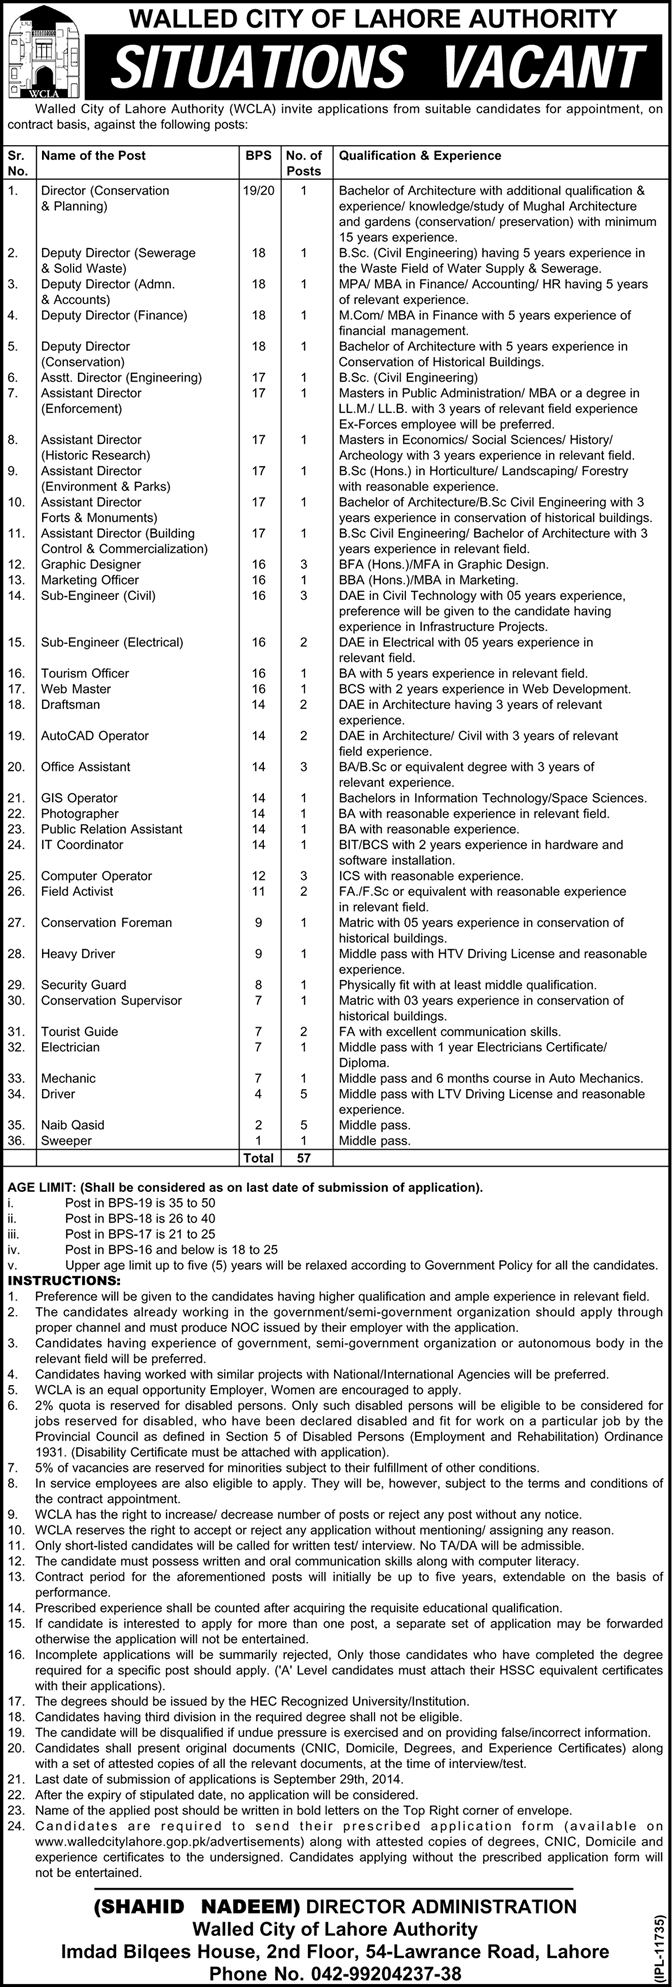 Walled City of Lahore Authority Jobs 2014 September Latest WCLA Advertisement